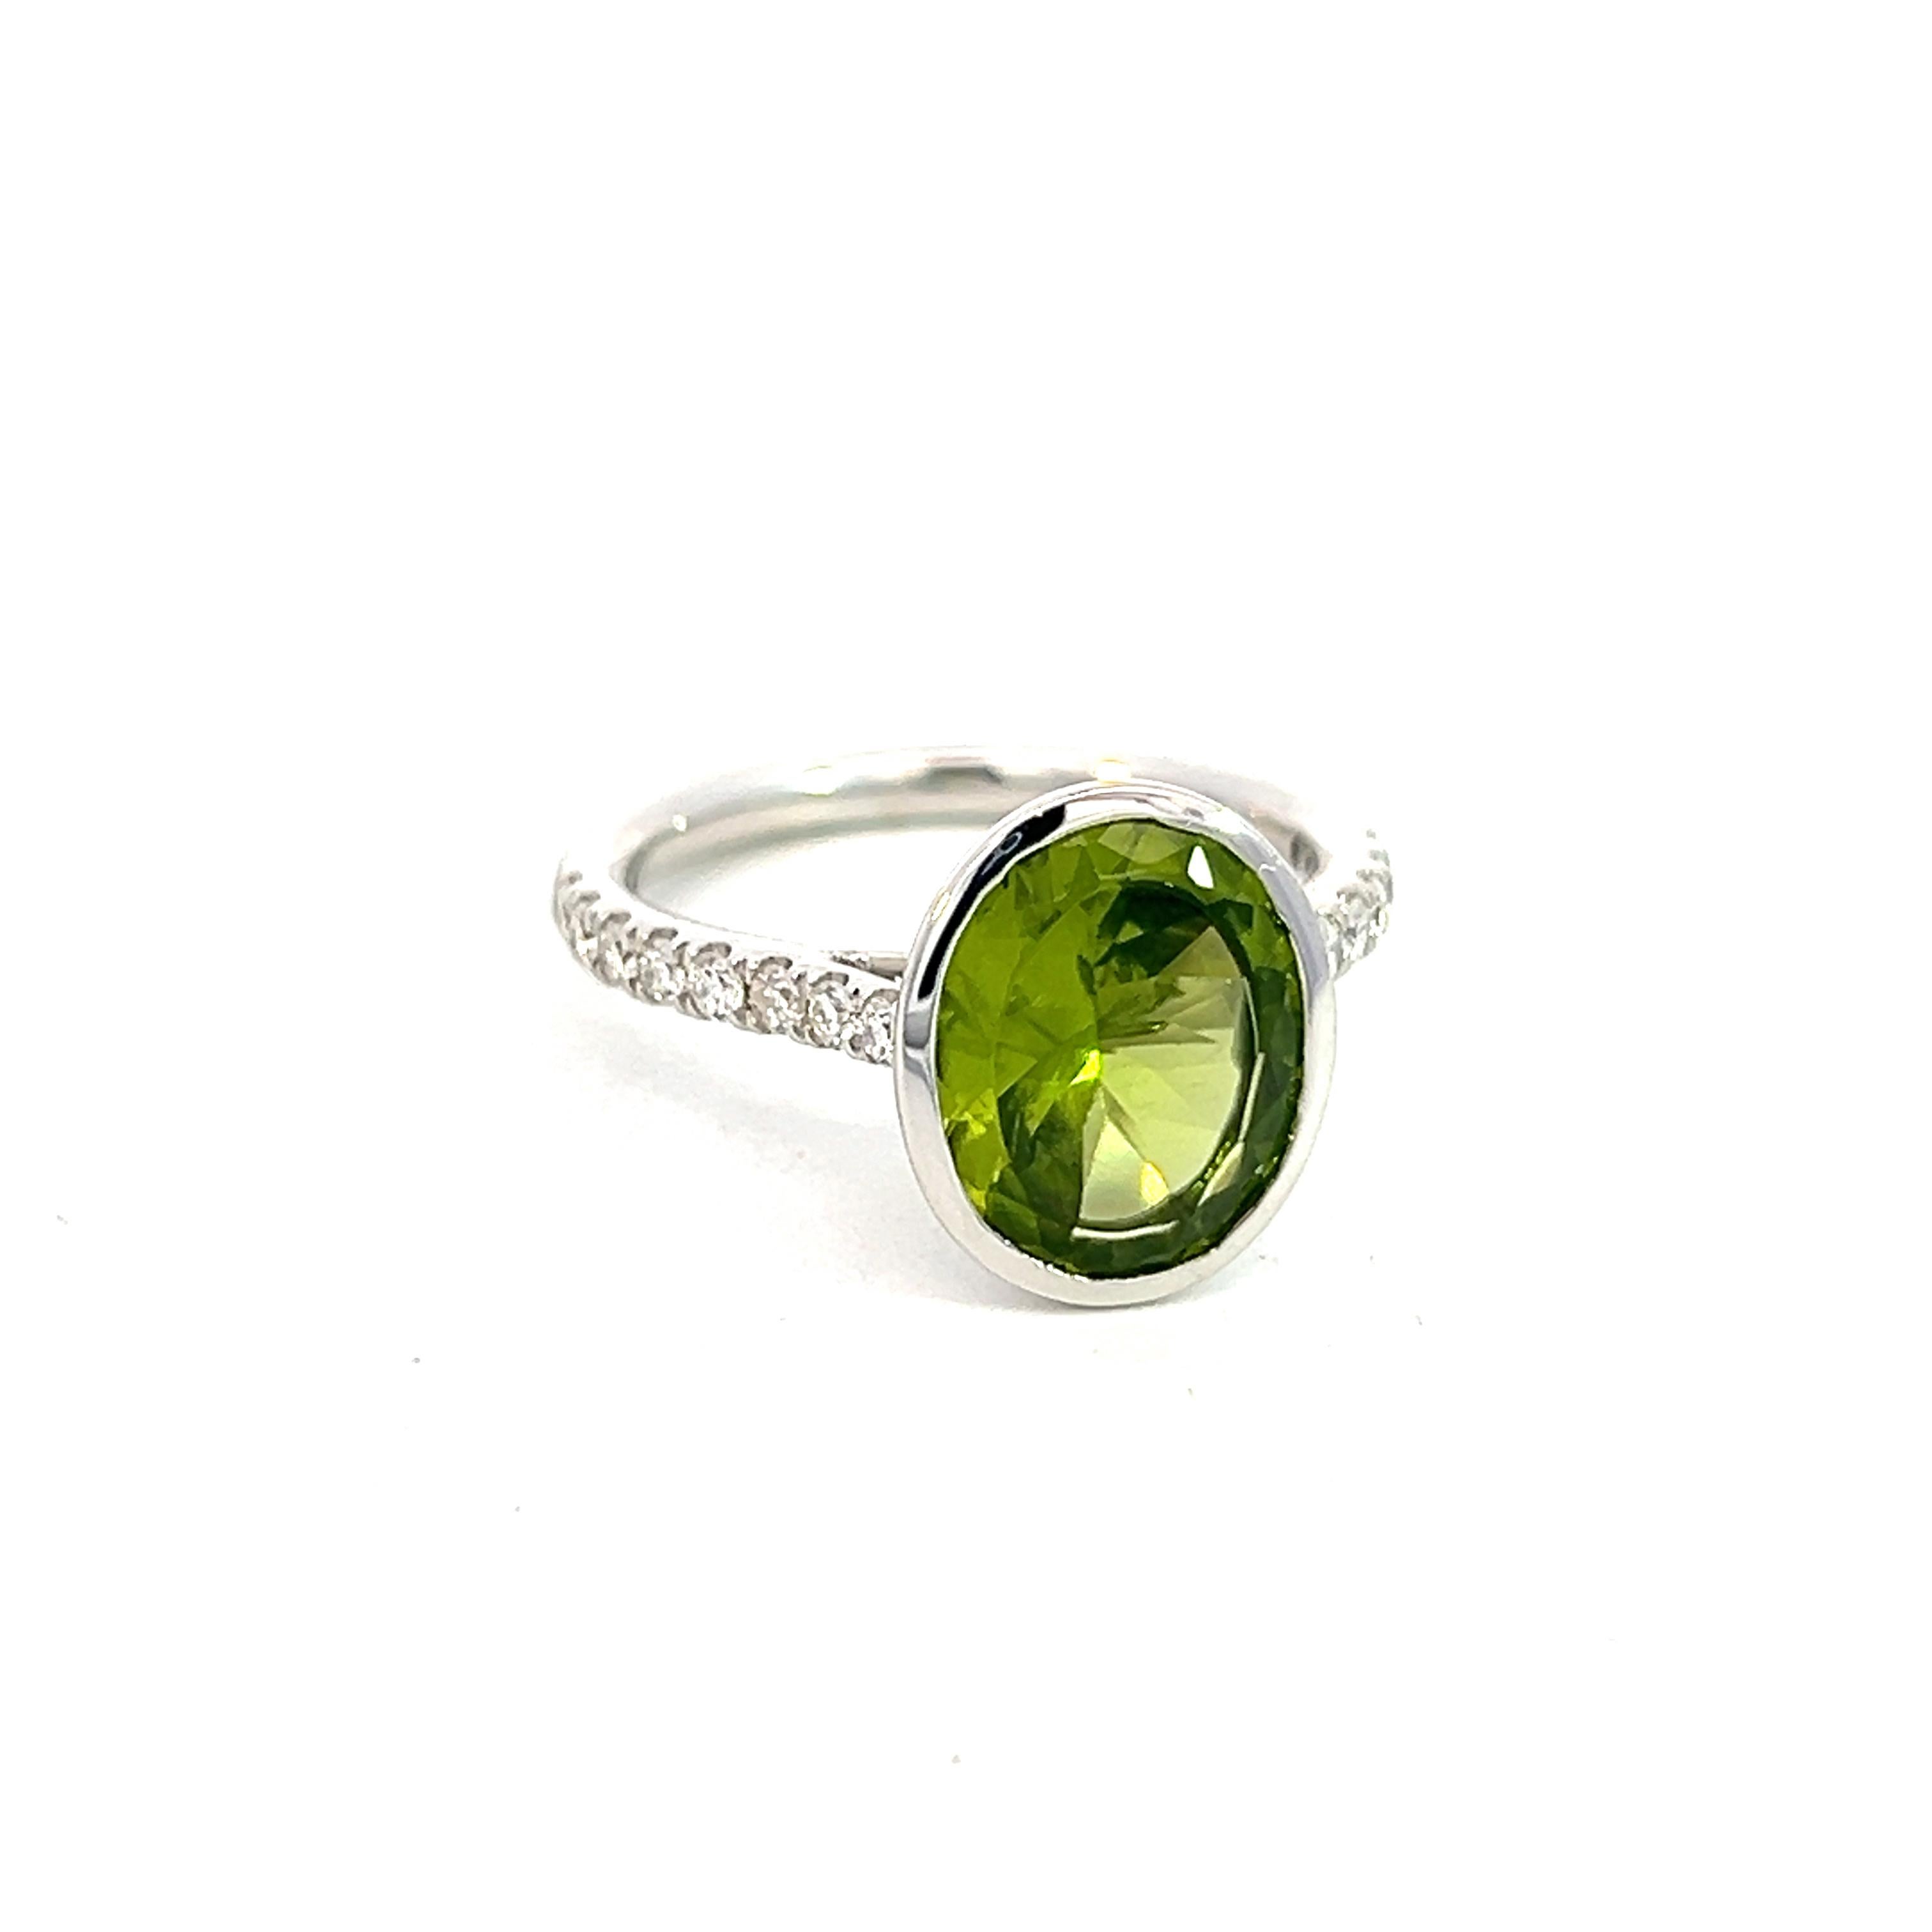 Natural Peridot Diamond Ring 6.5 14k W Gold 3.49 TCW Certified For Sale 1